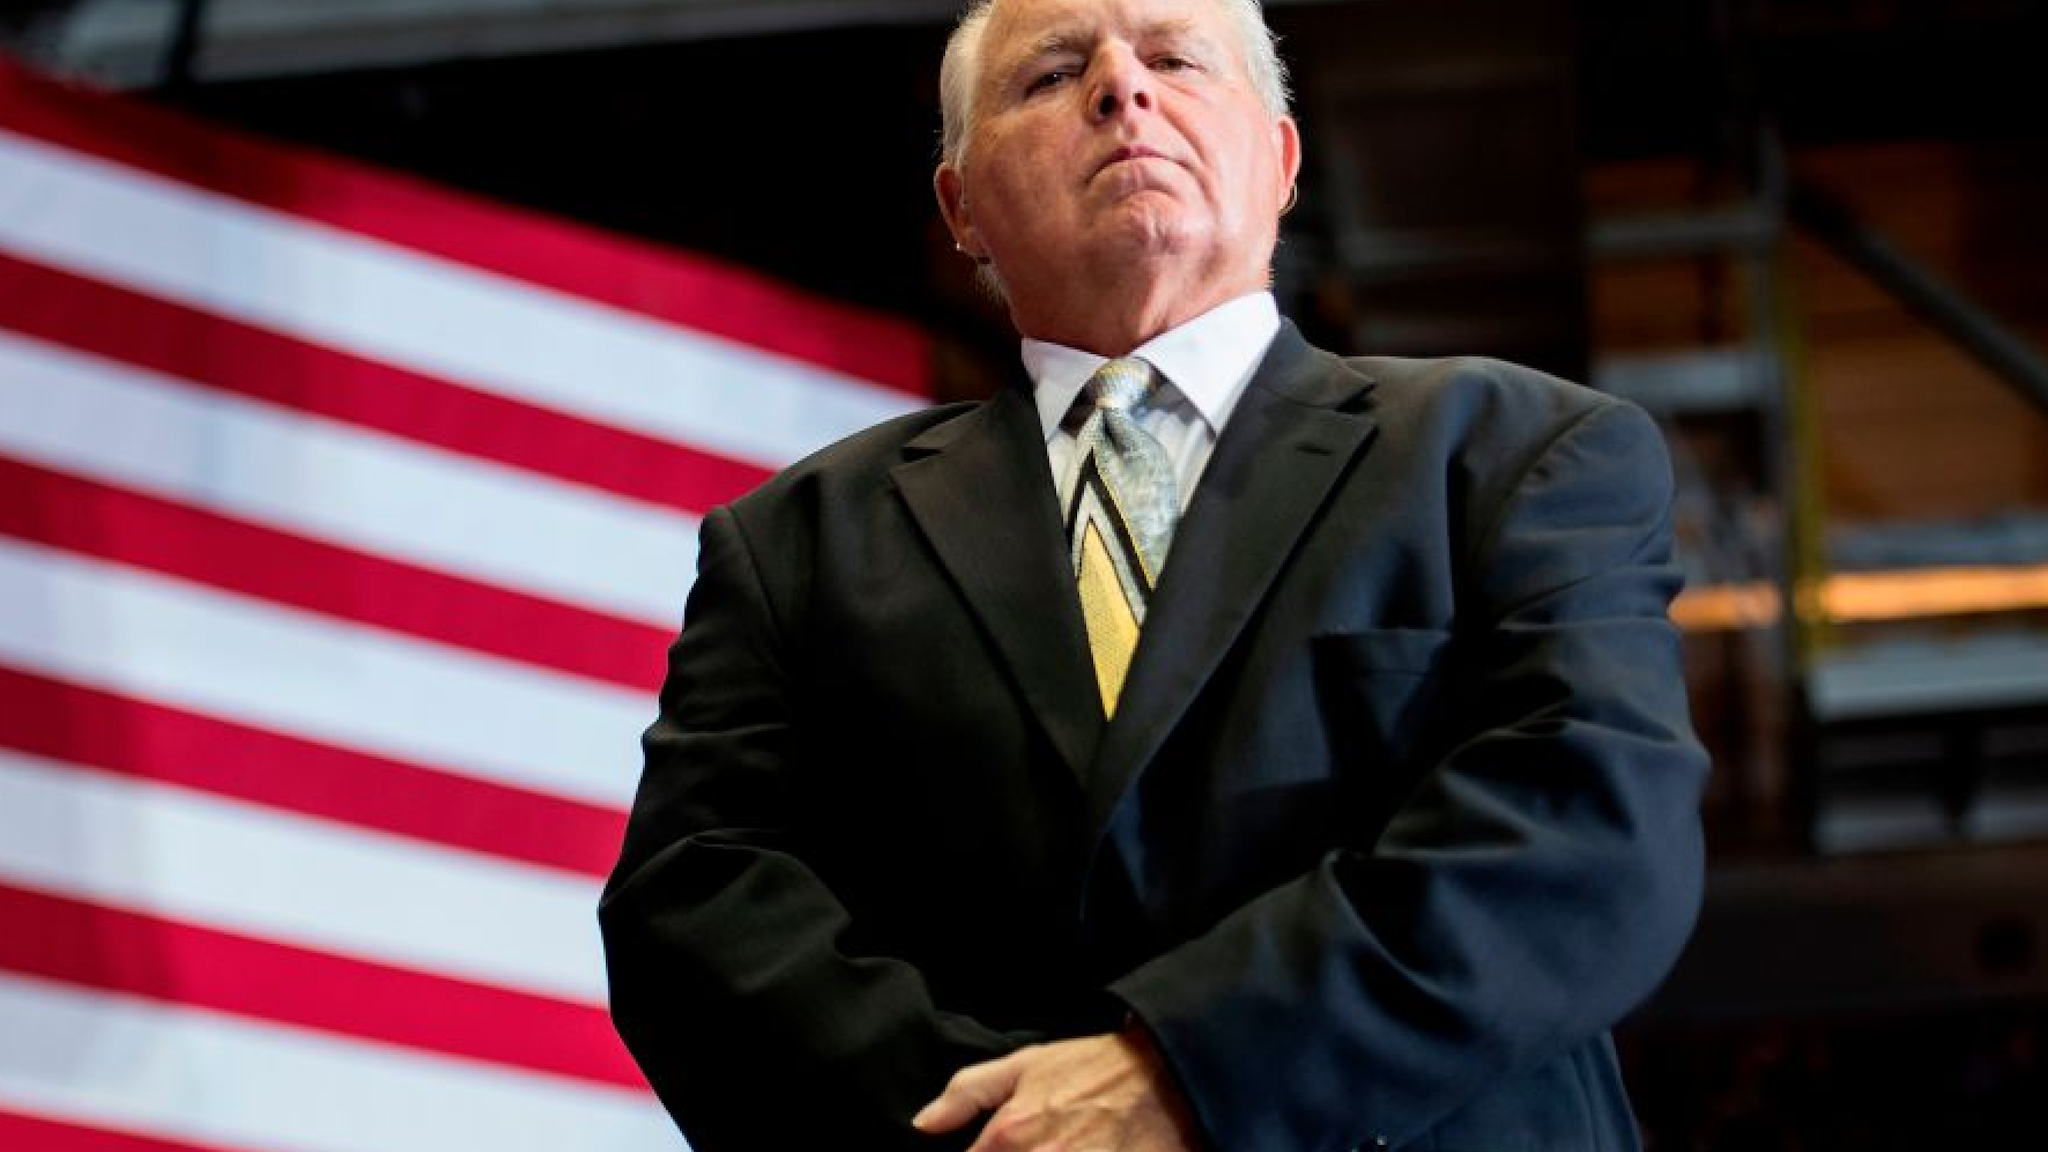 US radio talk show host and conservative political commentator Rush Limbaugh looks on before introducing US President Donald Trump to deliver remarks at a Make America Great Again rally in Cape Girardeau, MO, on November 5, 2018.